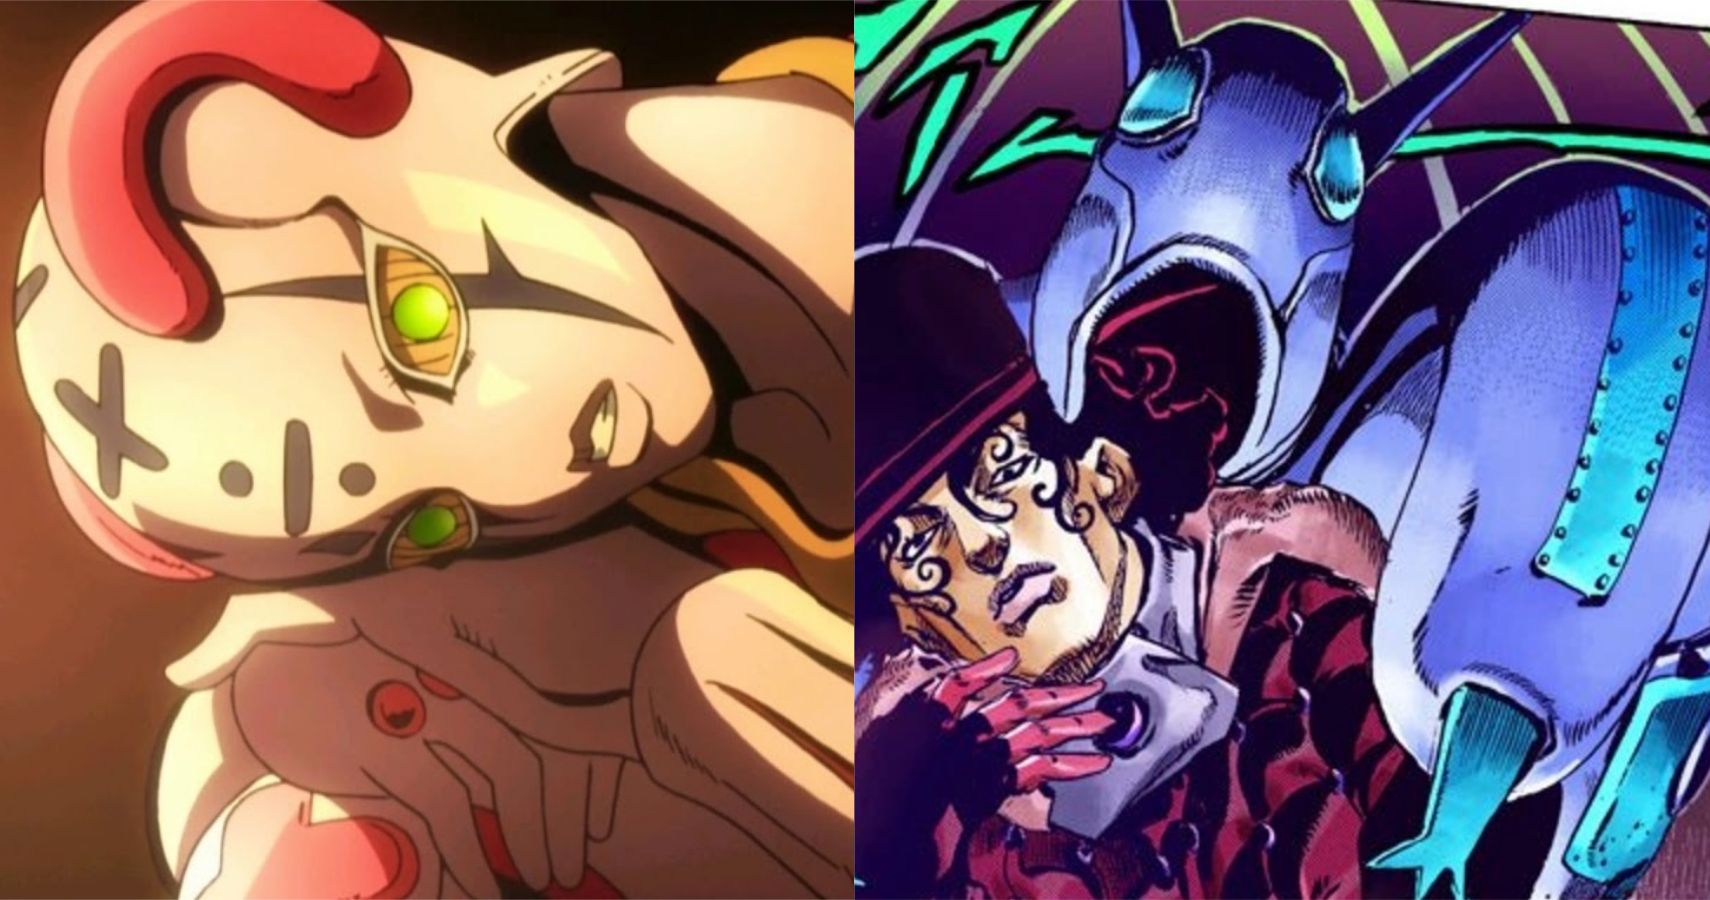 What is the most underrated JoJo stand? - Quora